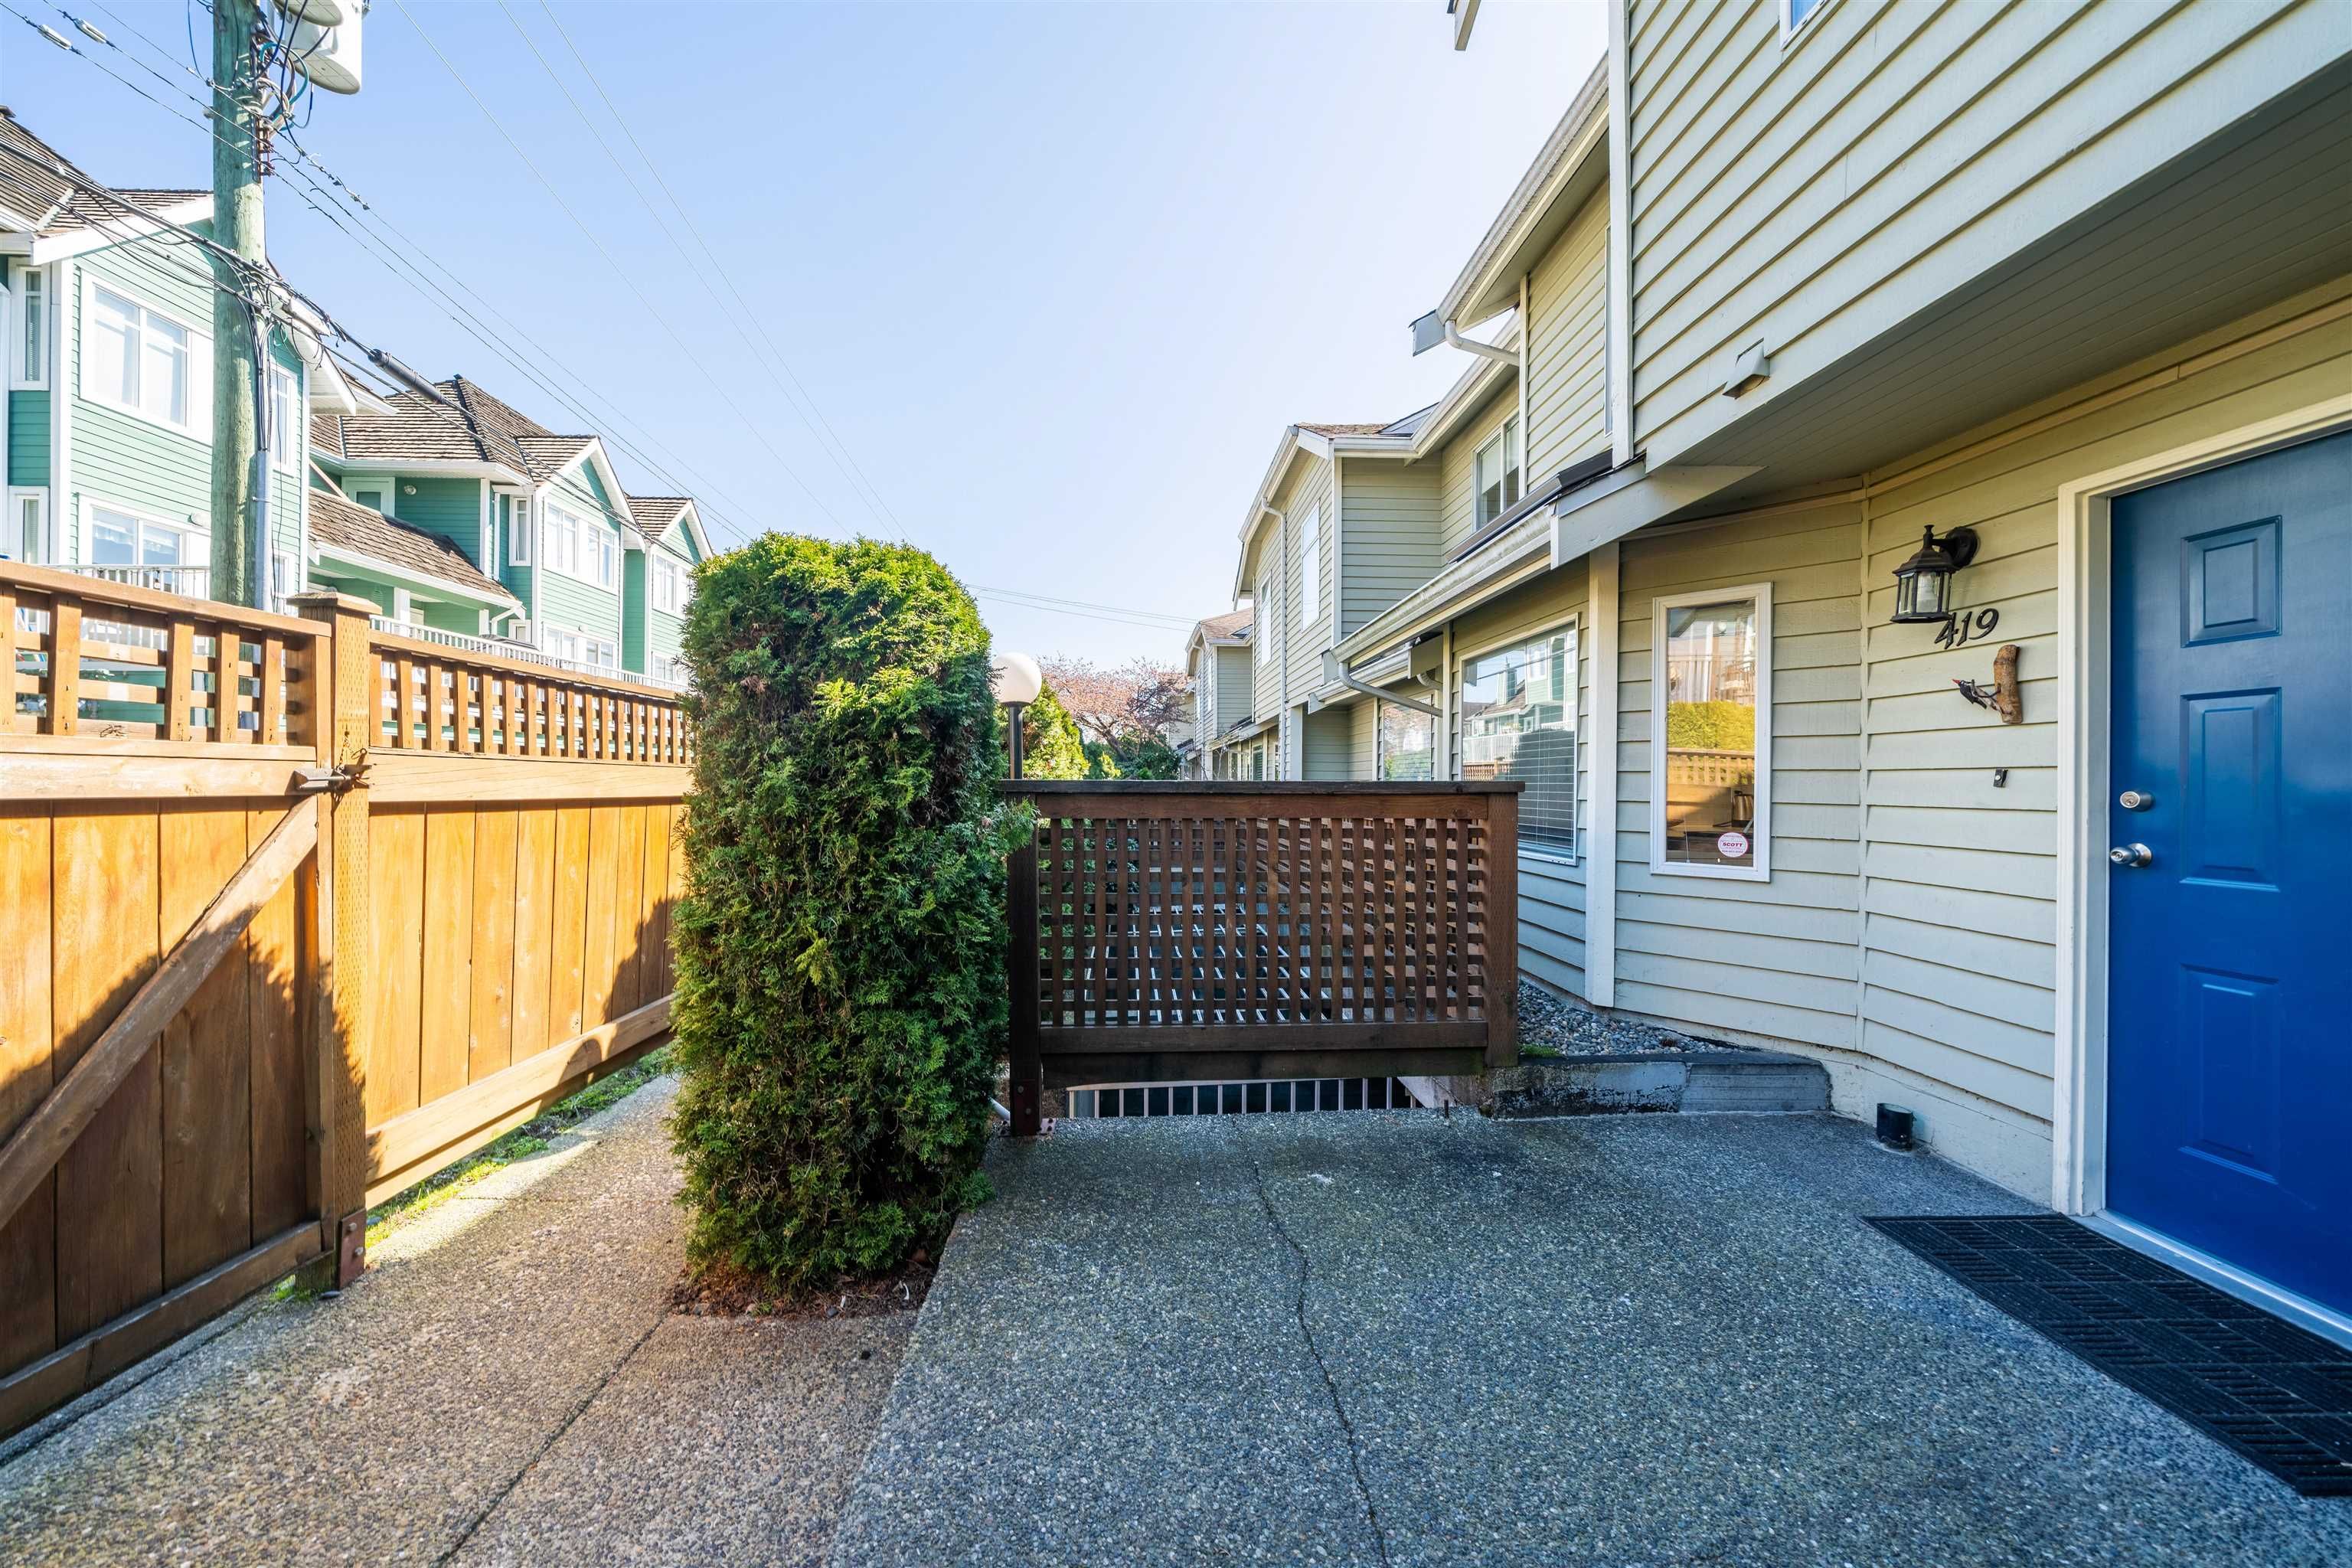 This property has sold: 419 ST. ANDREWS AVE in North Vancouver